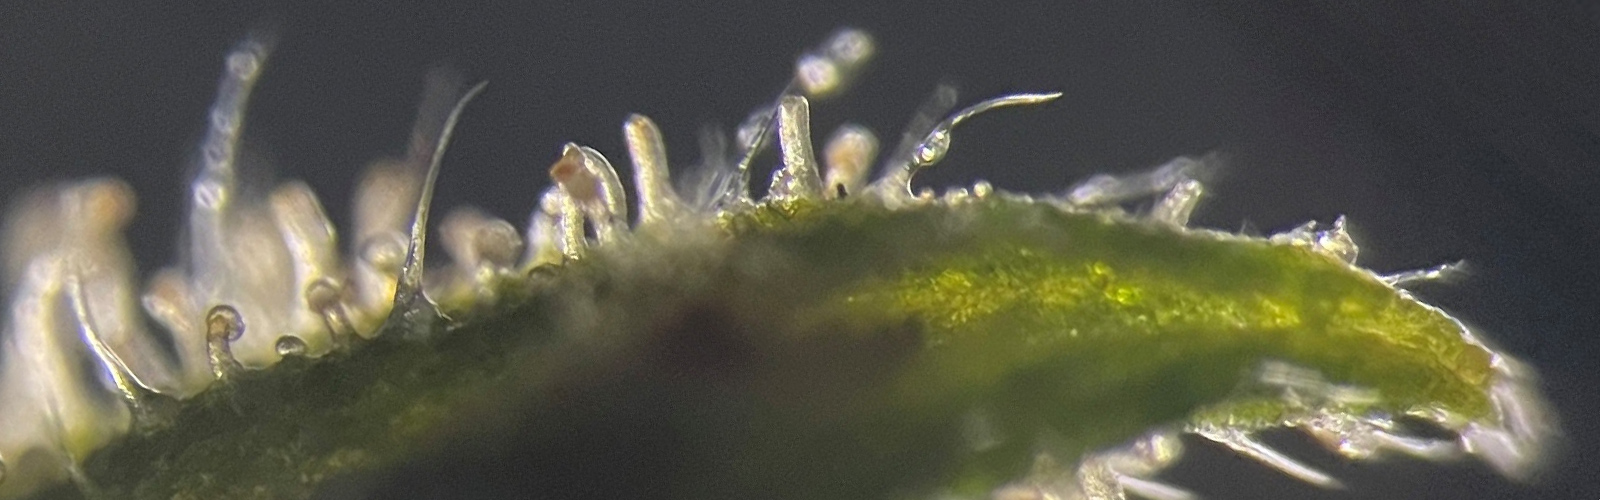 MicroWorld image competition winner 2021 - Cannabis-trichomes under microscope